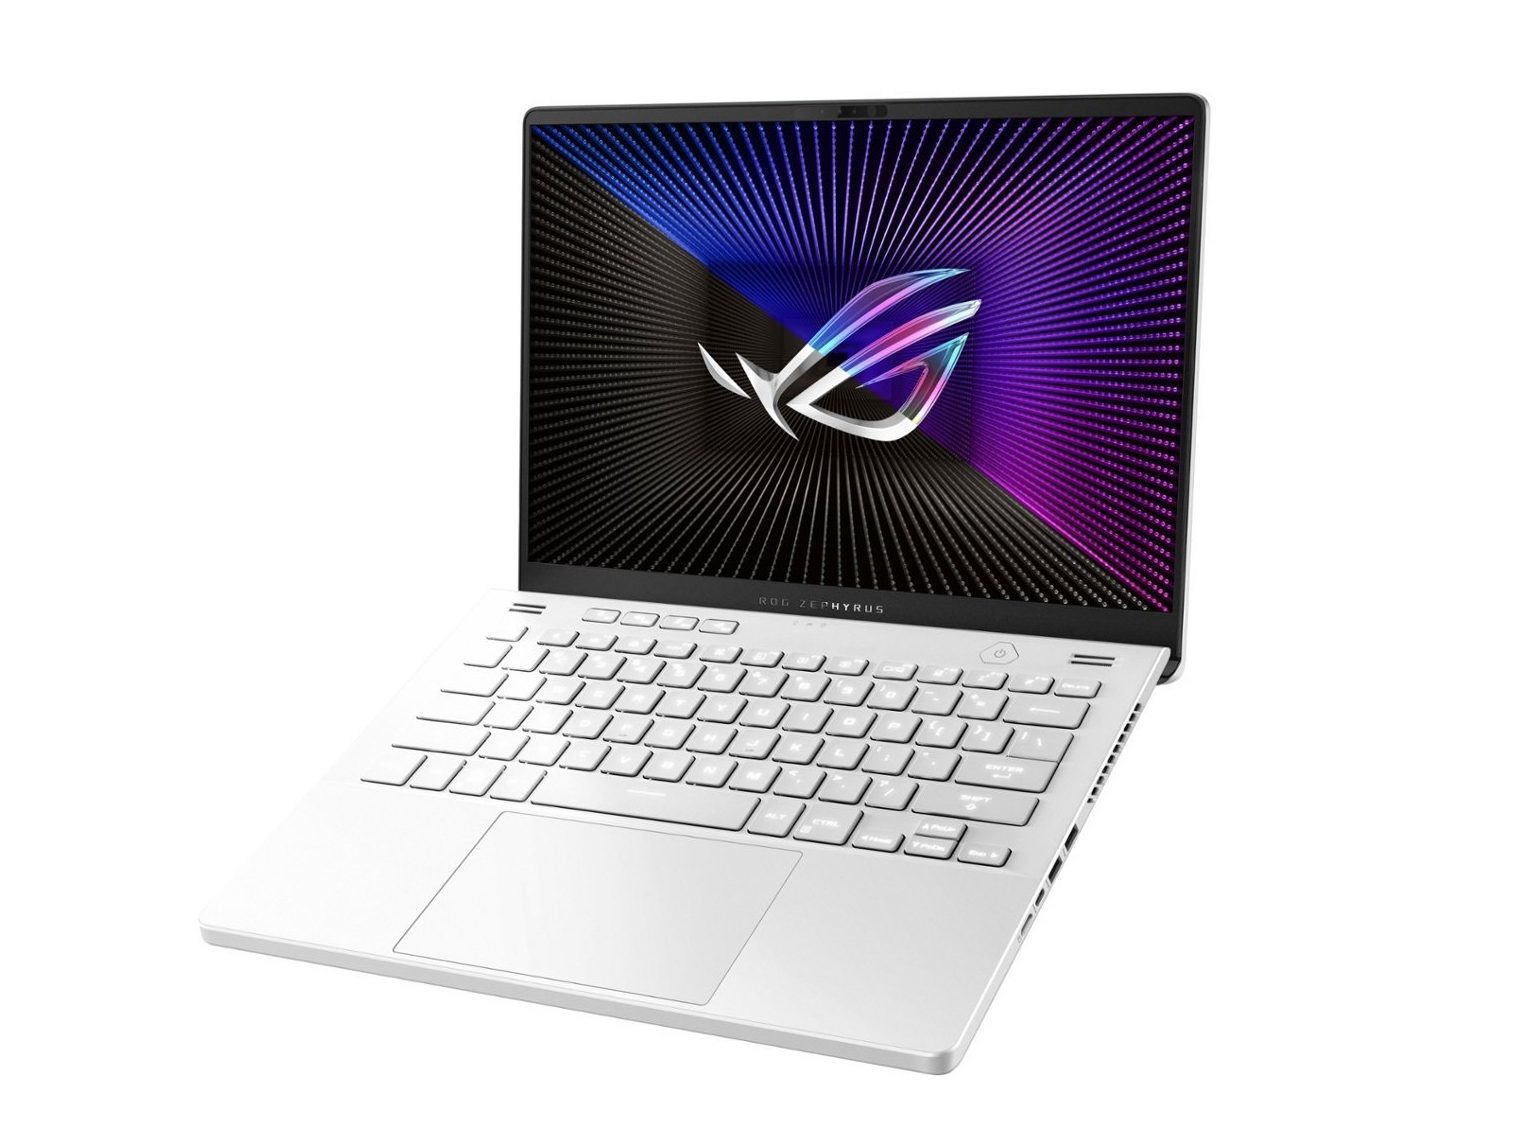 The Asus ROG Zephrus G14's Moonlight White color, with keyboard clearly shown.